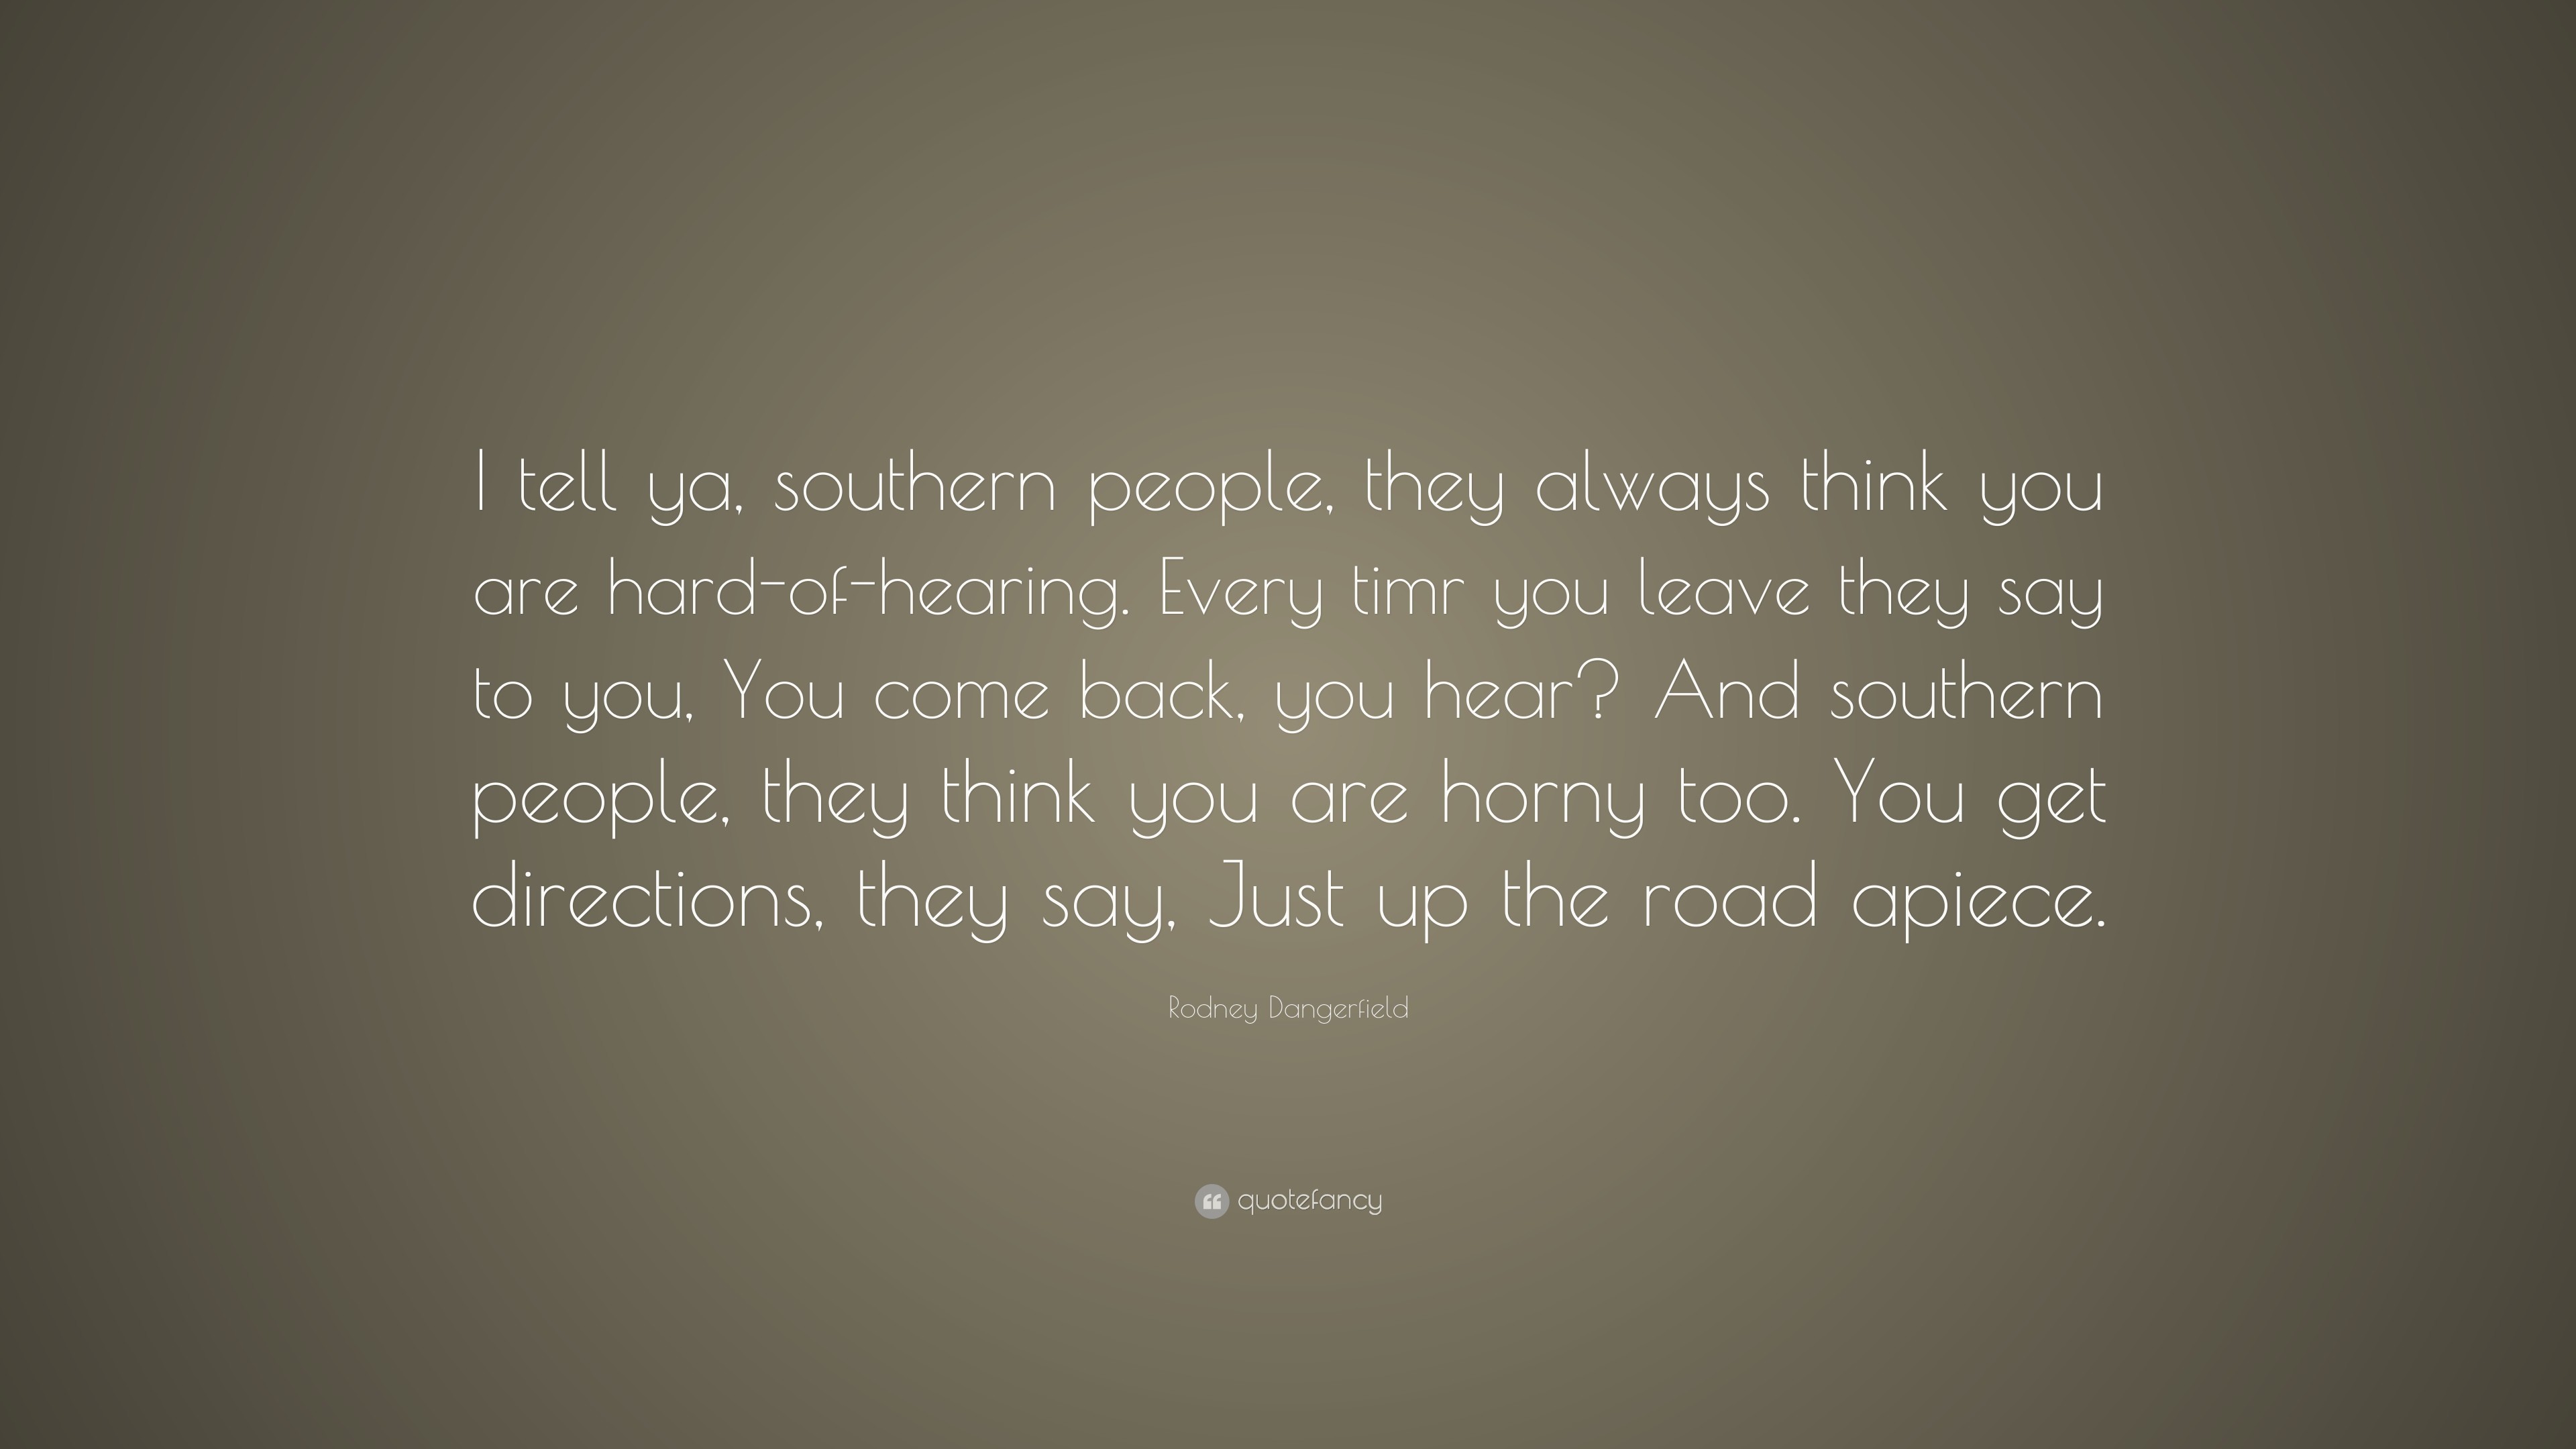 3840x2160 Rodney Dangerfield Quote: “I tell ya, southern people, they always think you